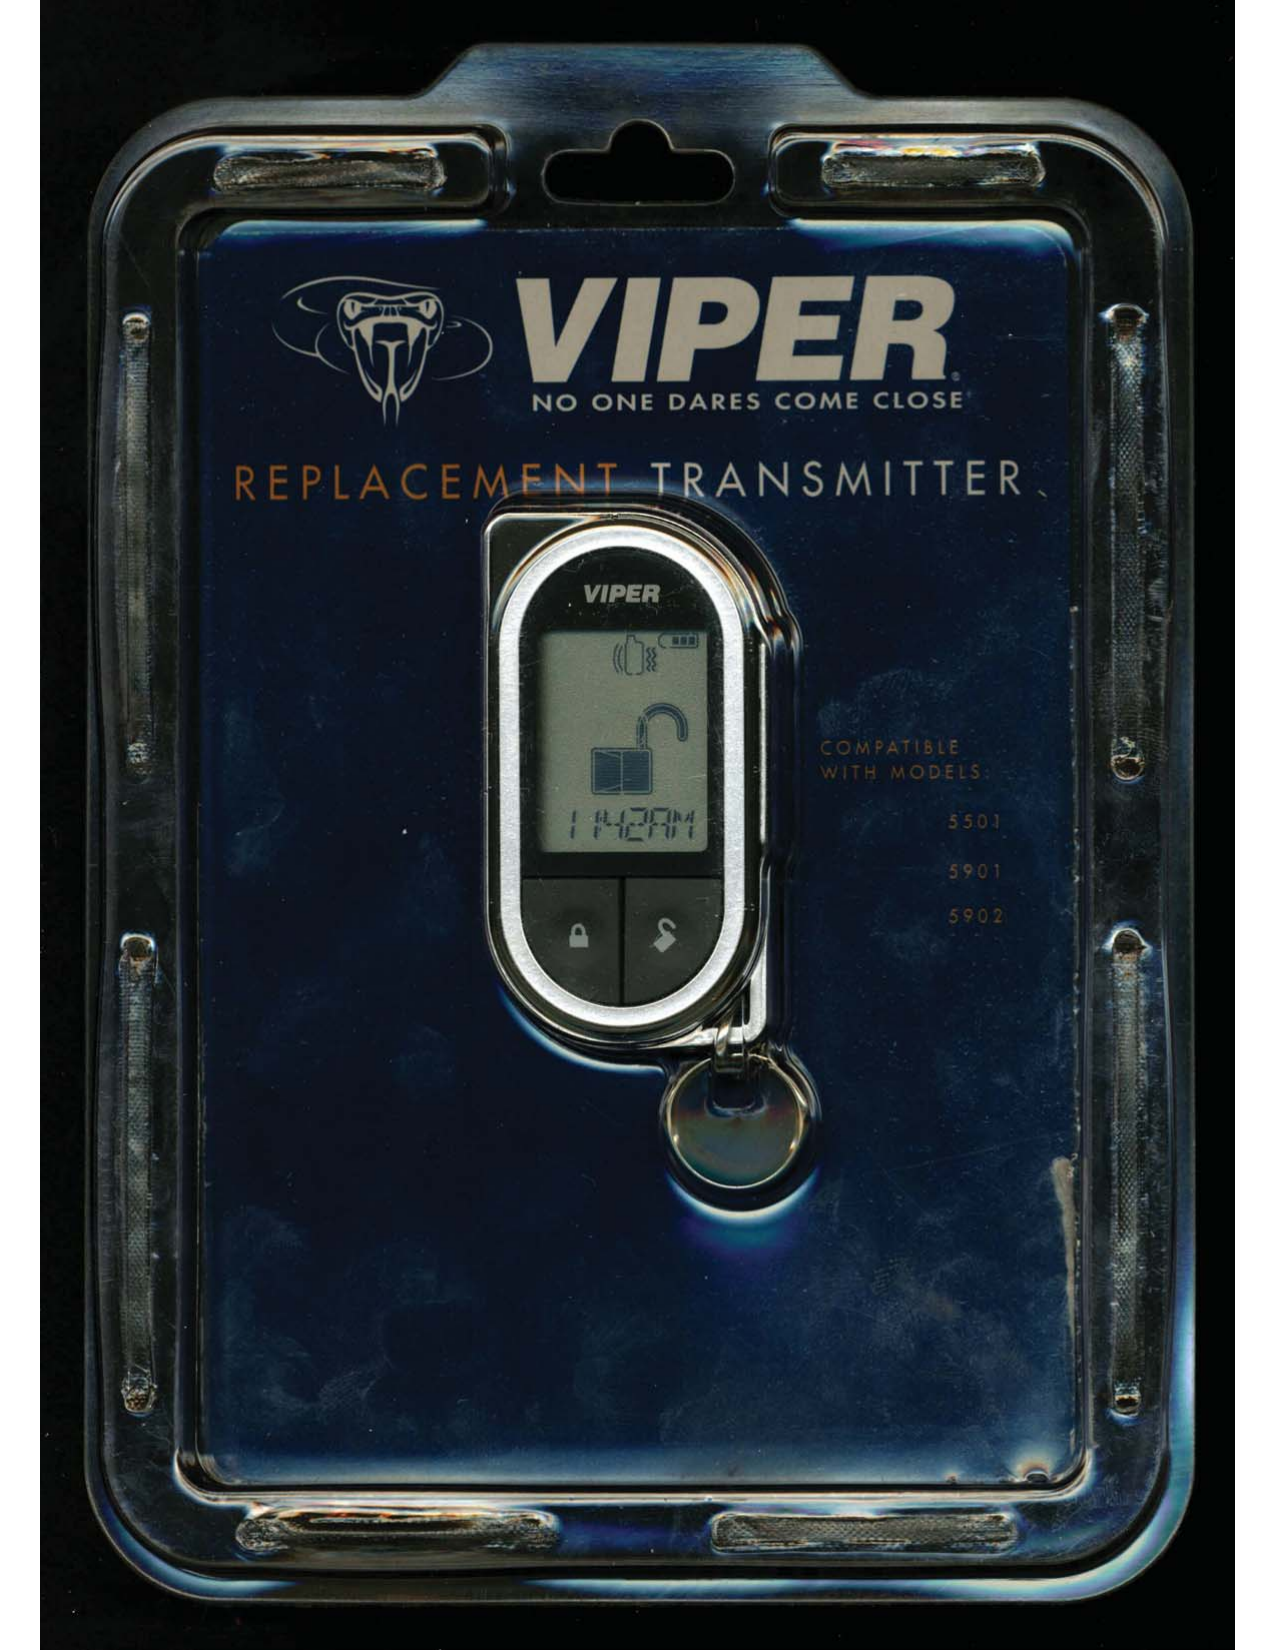 VIPER 7752V 2-Way SST Supercode Remote Control Replacement Transmitter 